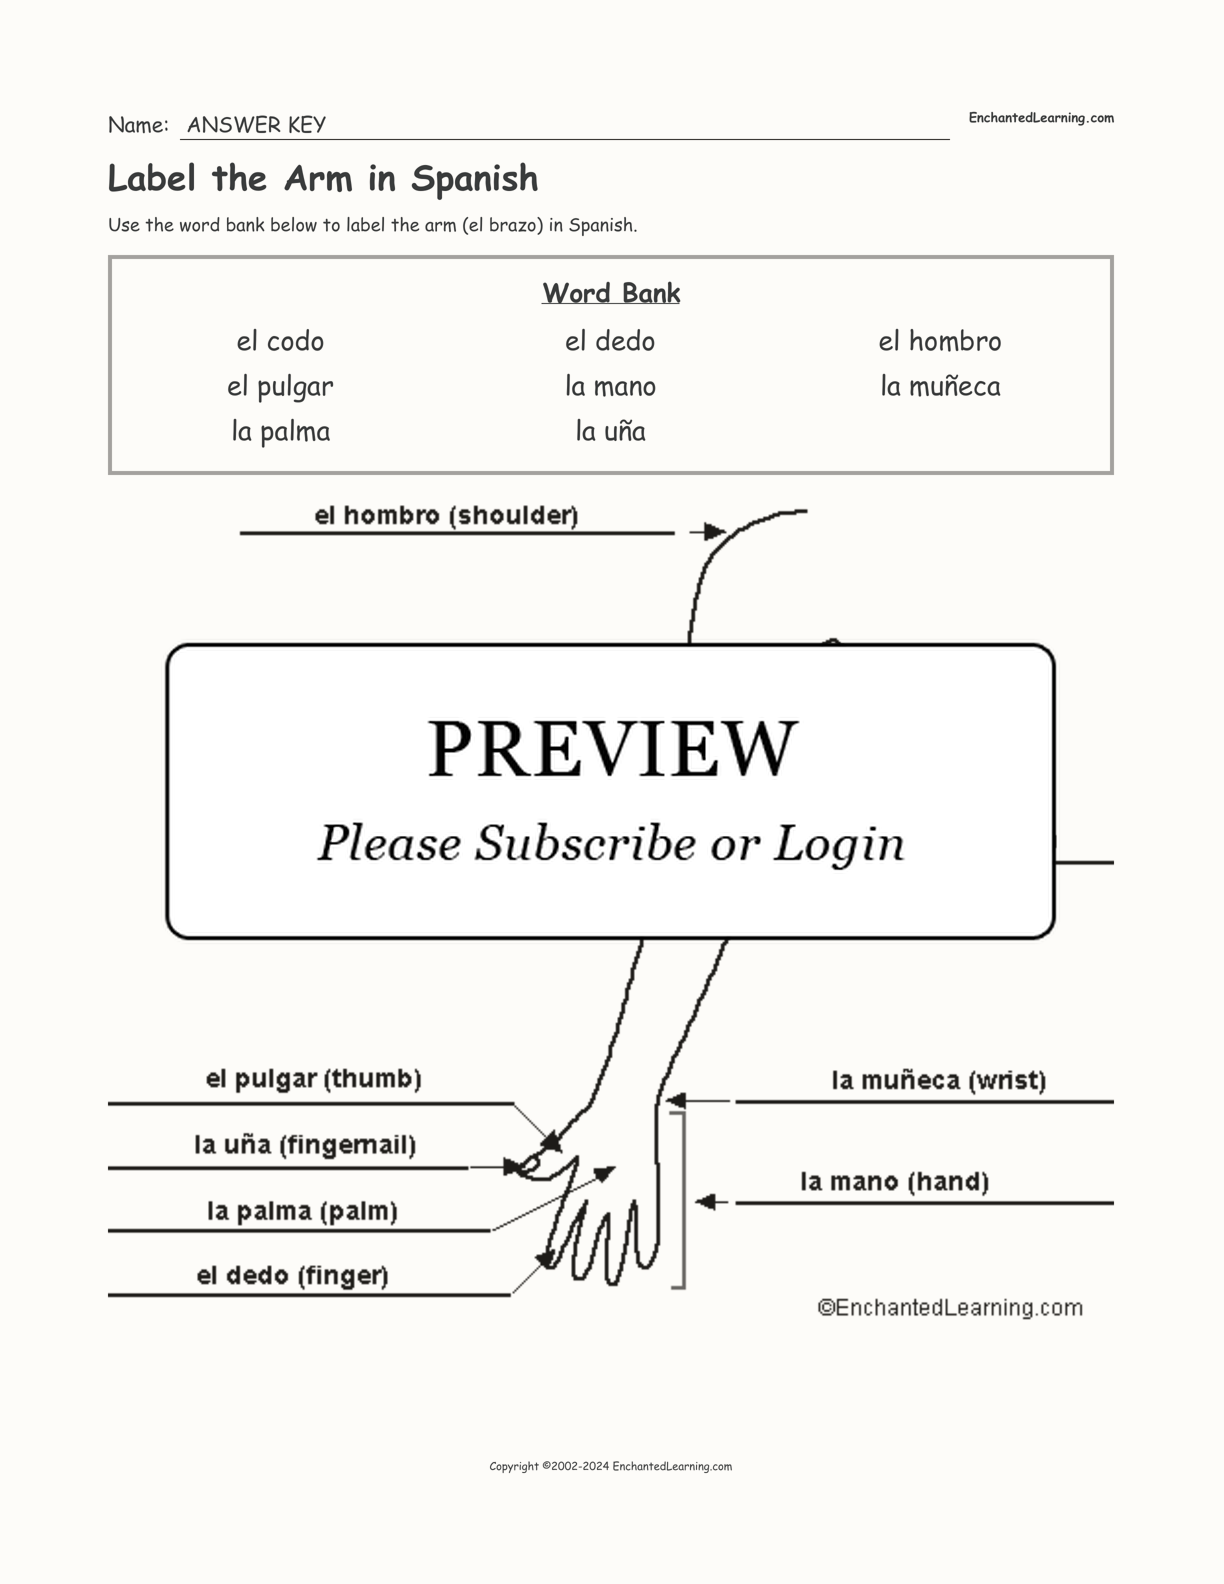 Label the Arm in Spanish interactive worksheet page 2